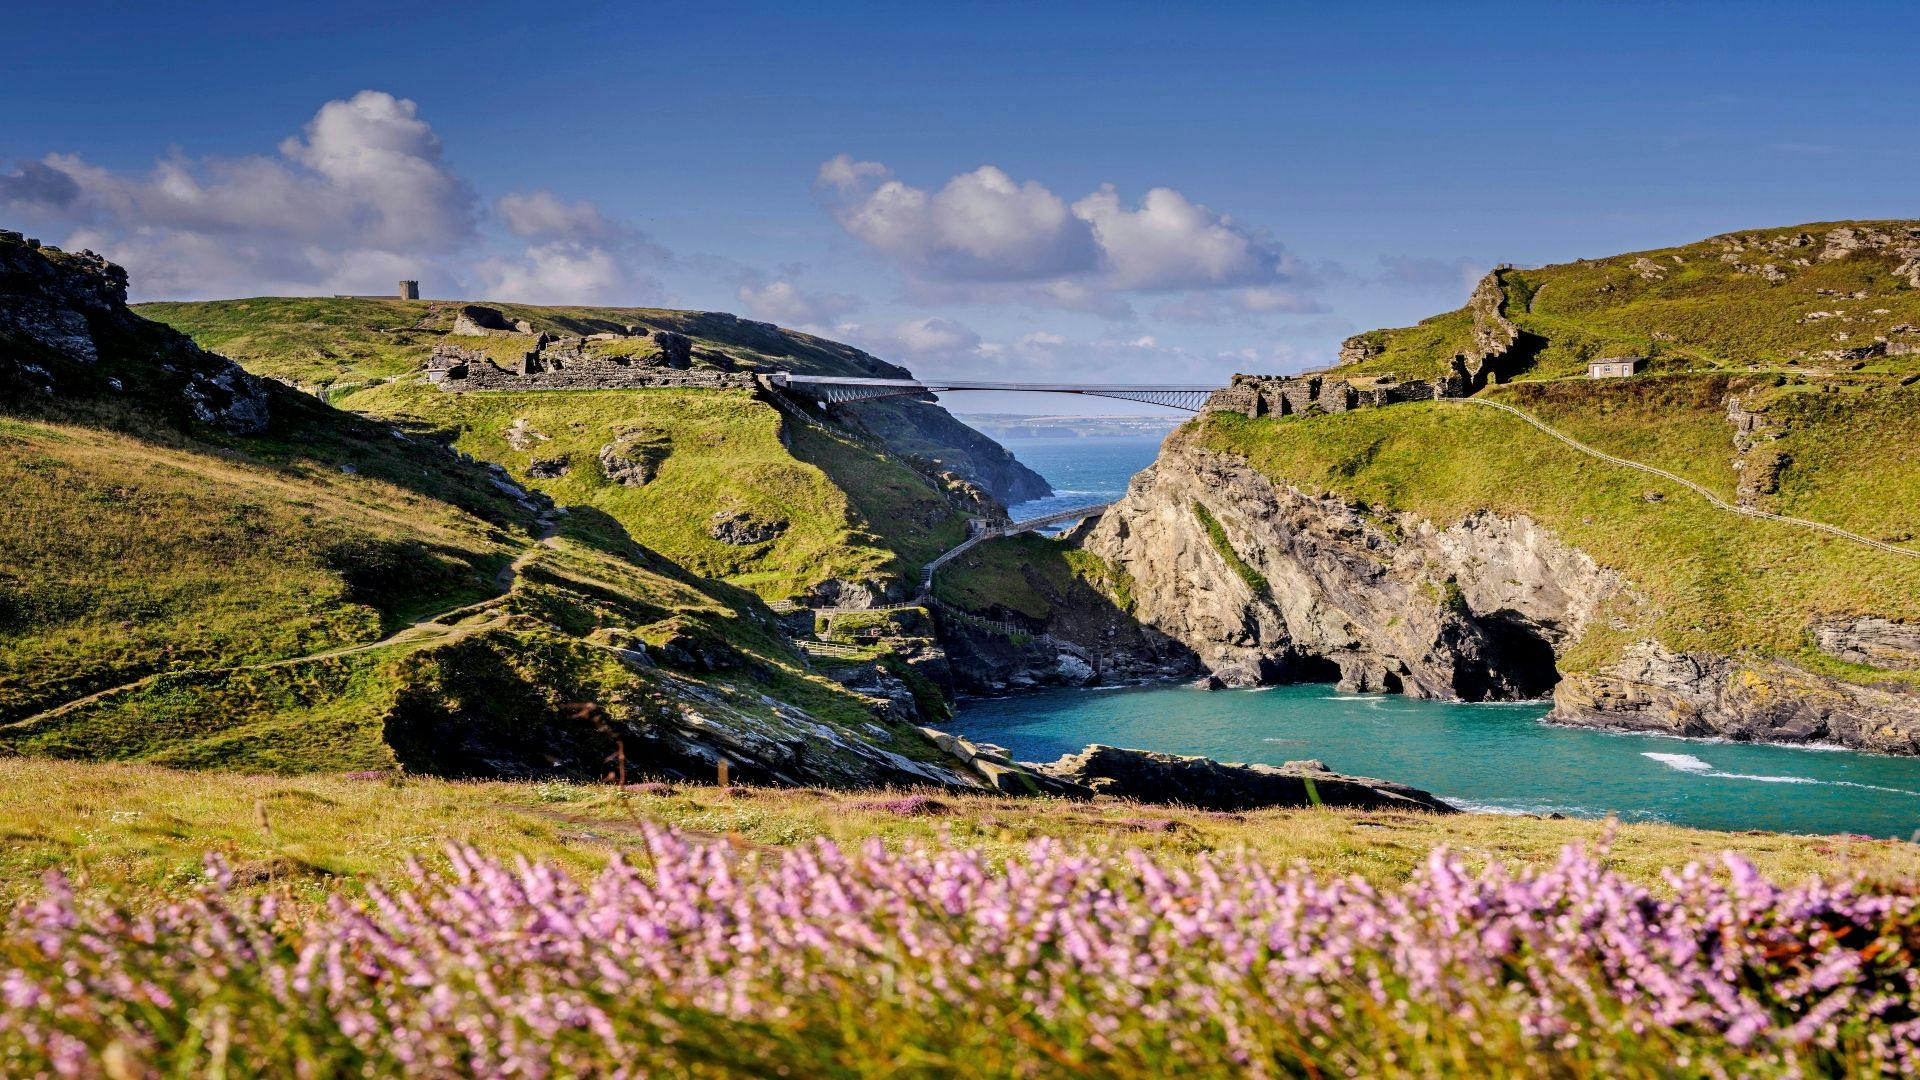 Discover the magic of Tintagel Castle